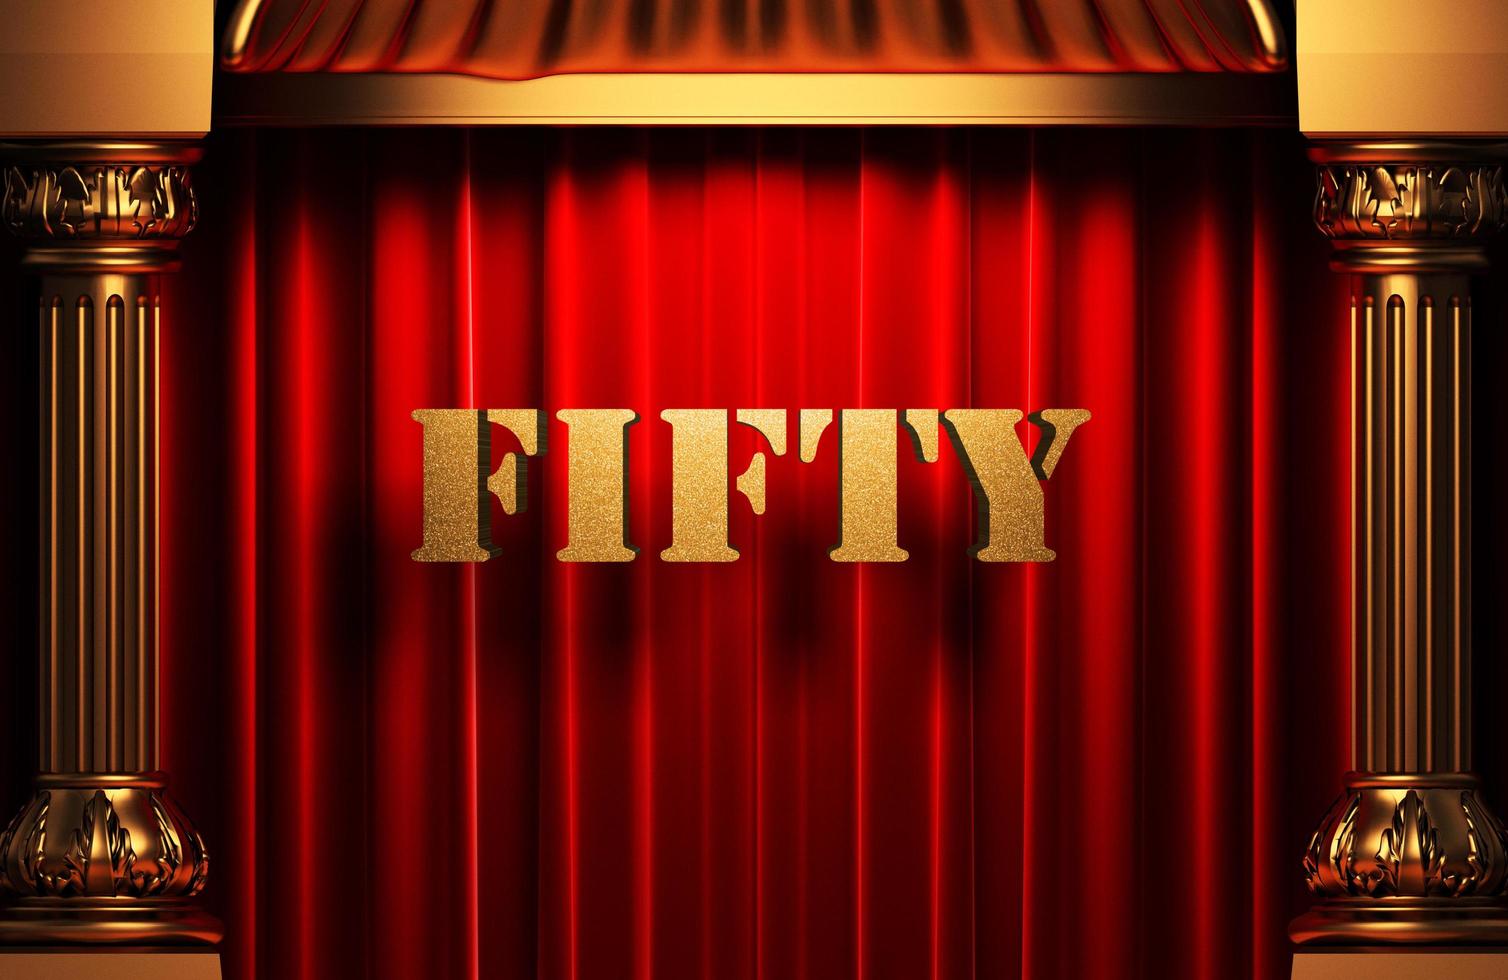 fifty golden word on red curtain photo